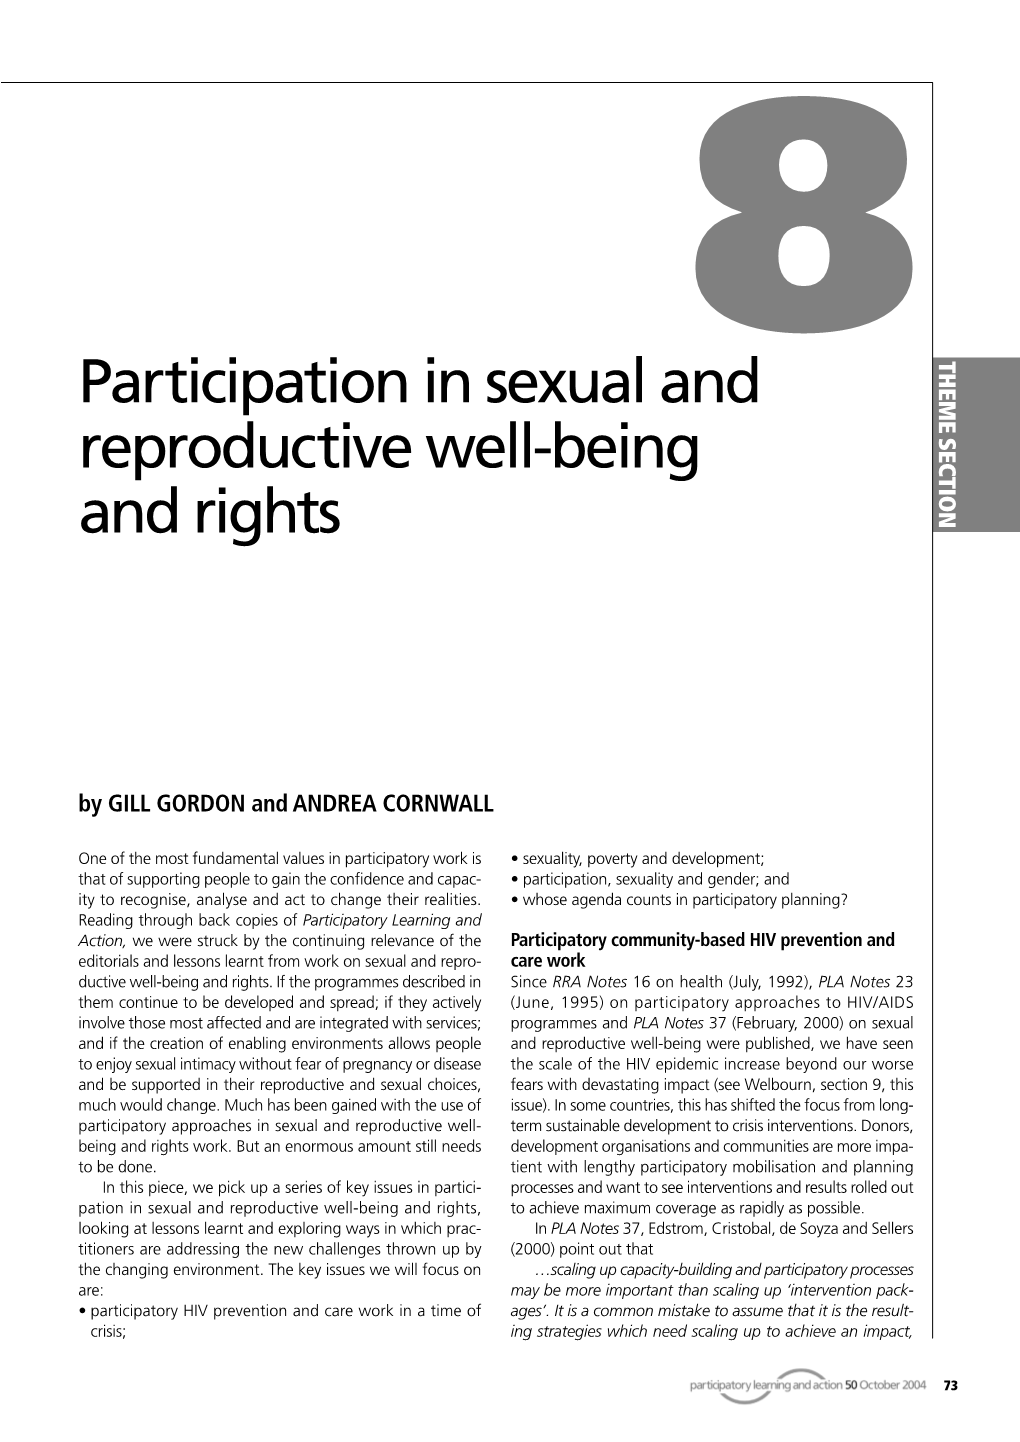 Participation in Sexual and Reproductive Well-Being and Rights